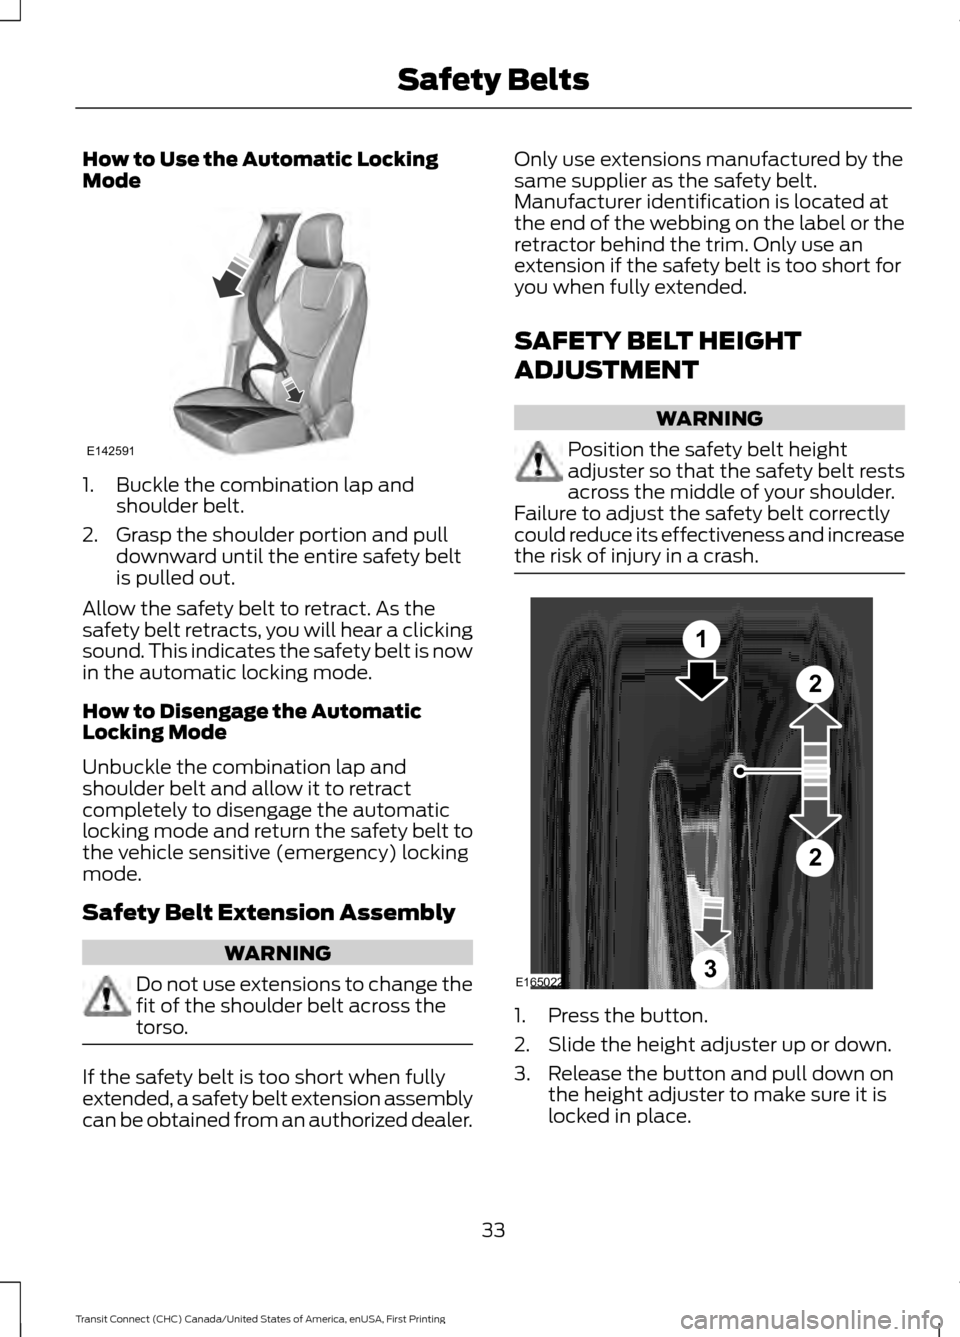 FORD TRANSIT CONNECT 2015 2.G Owners Guide How to Use the Automatic Locking
Mode
1. Buckle the combination lap and
shoulder belt.
2. Grasp the shoulder portion and pull downward until the entire safety belt
is pulled out.
Allow the safety belt